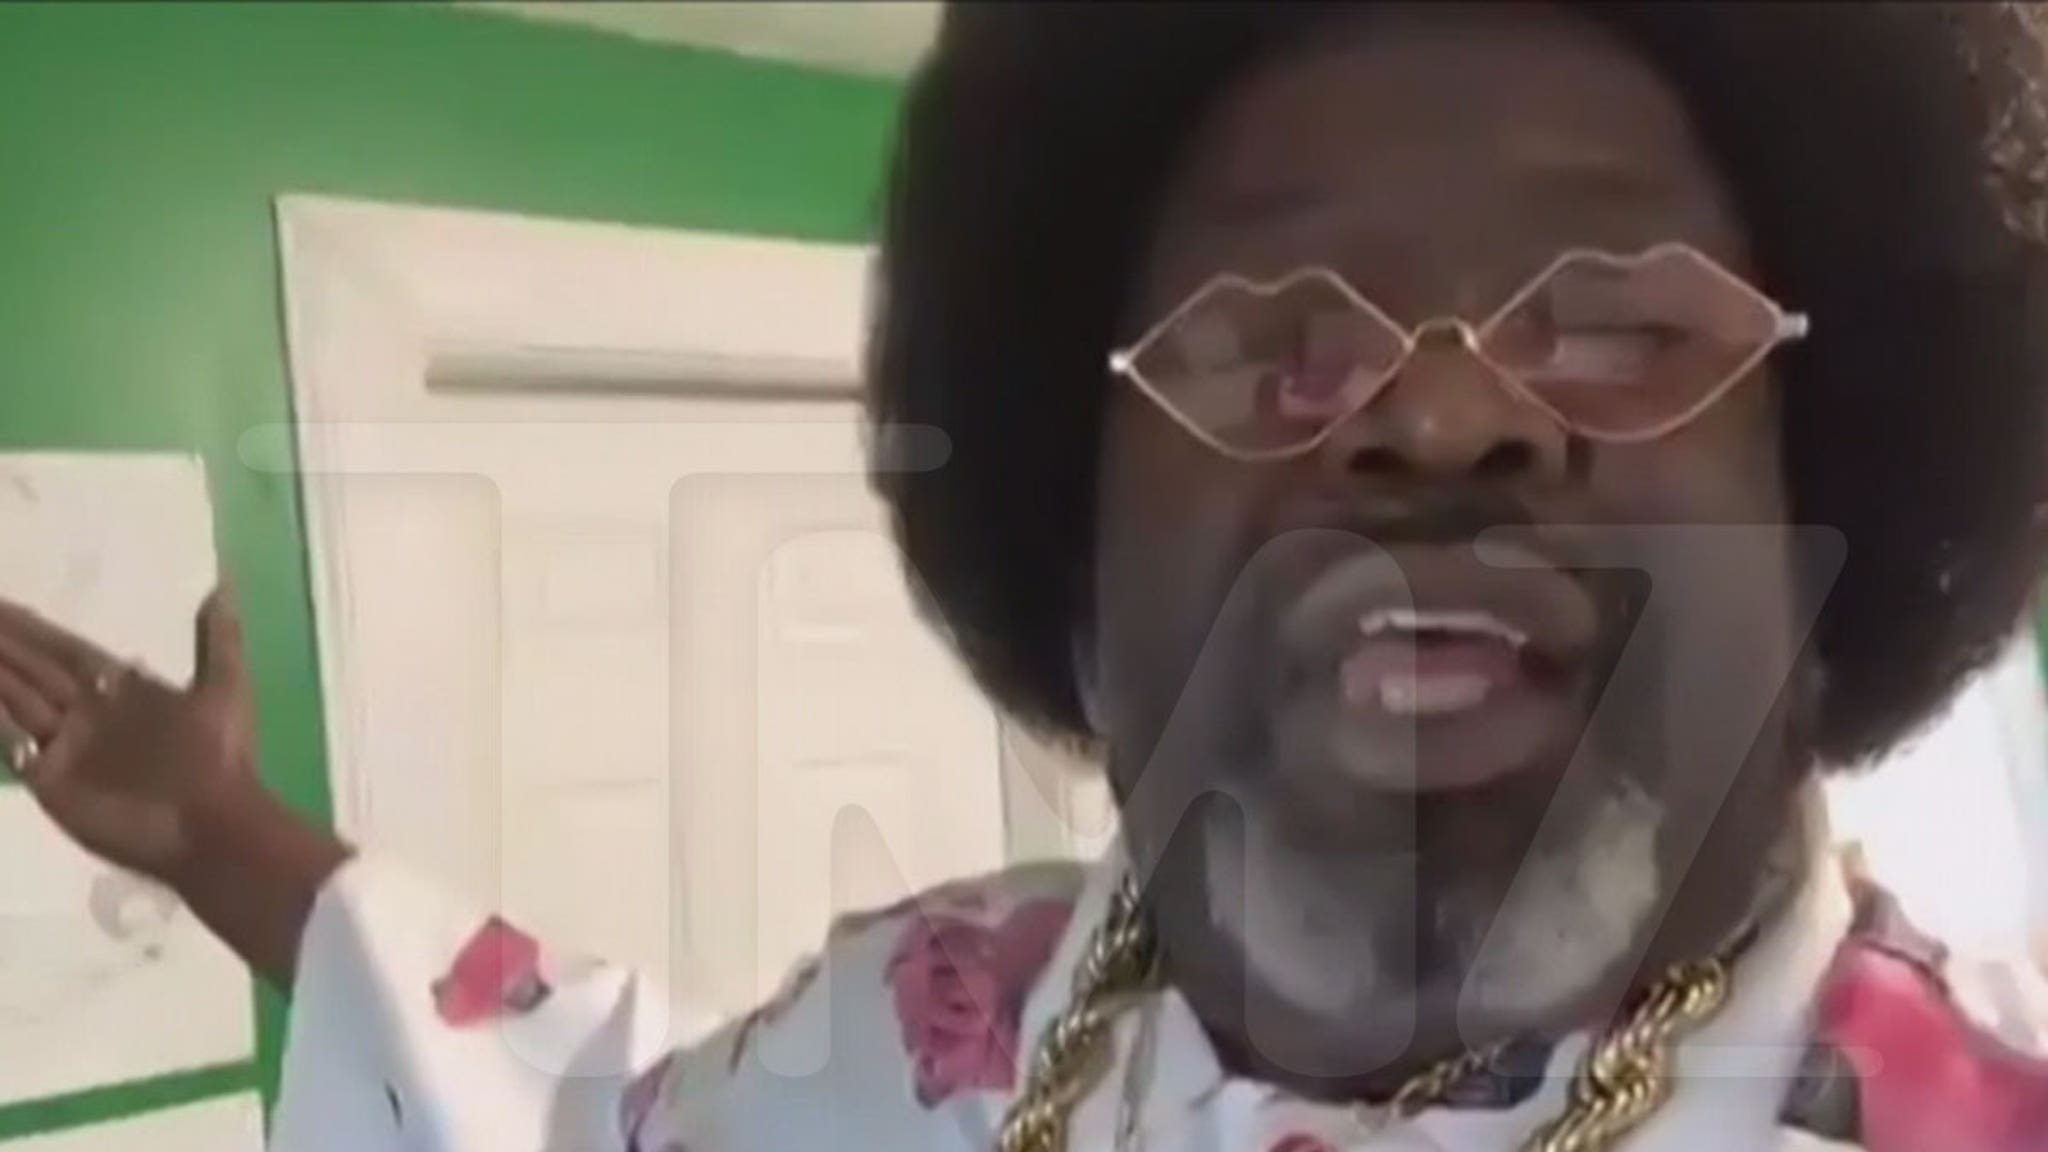 Afroman missing $400 in cash seized in police raid